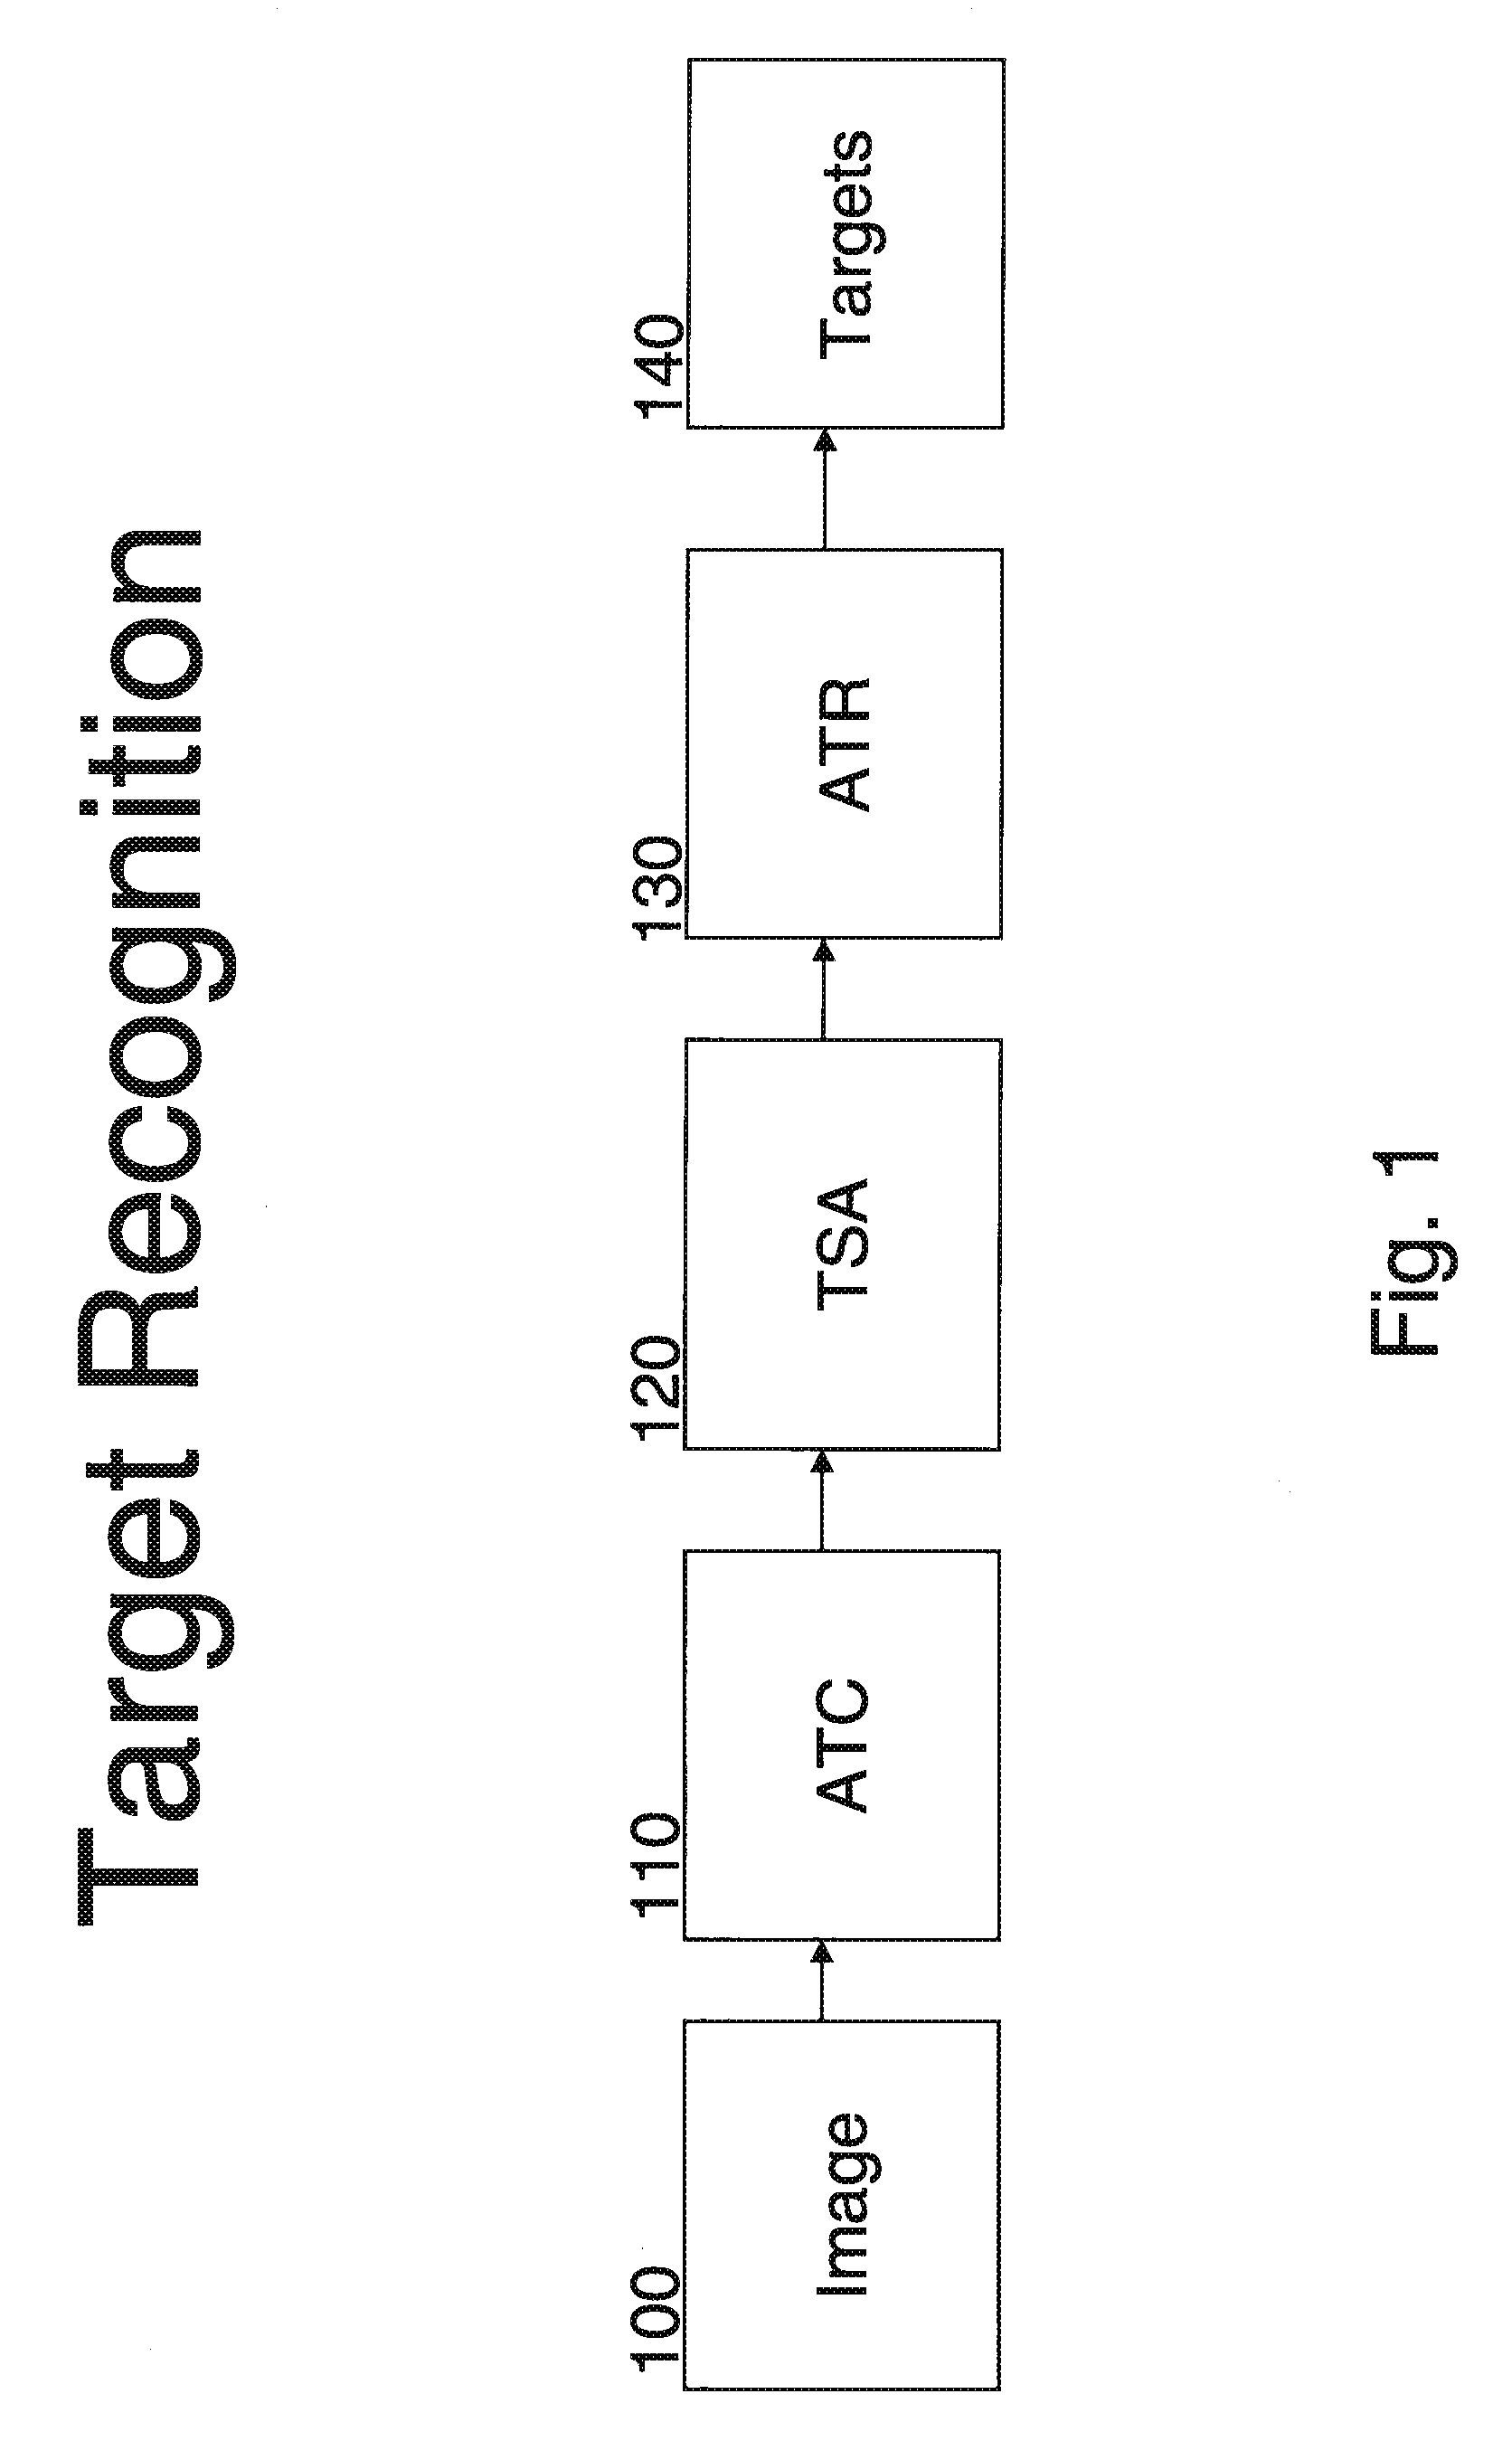 System and method for target separation of closely spaced targets in automatic target recognition